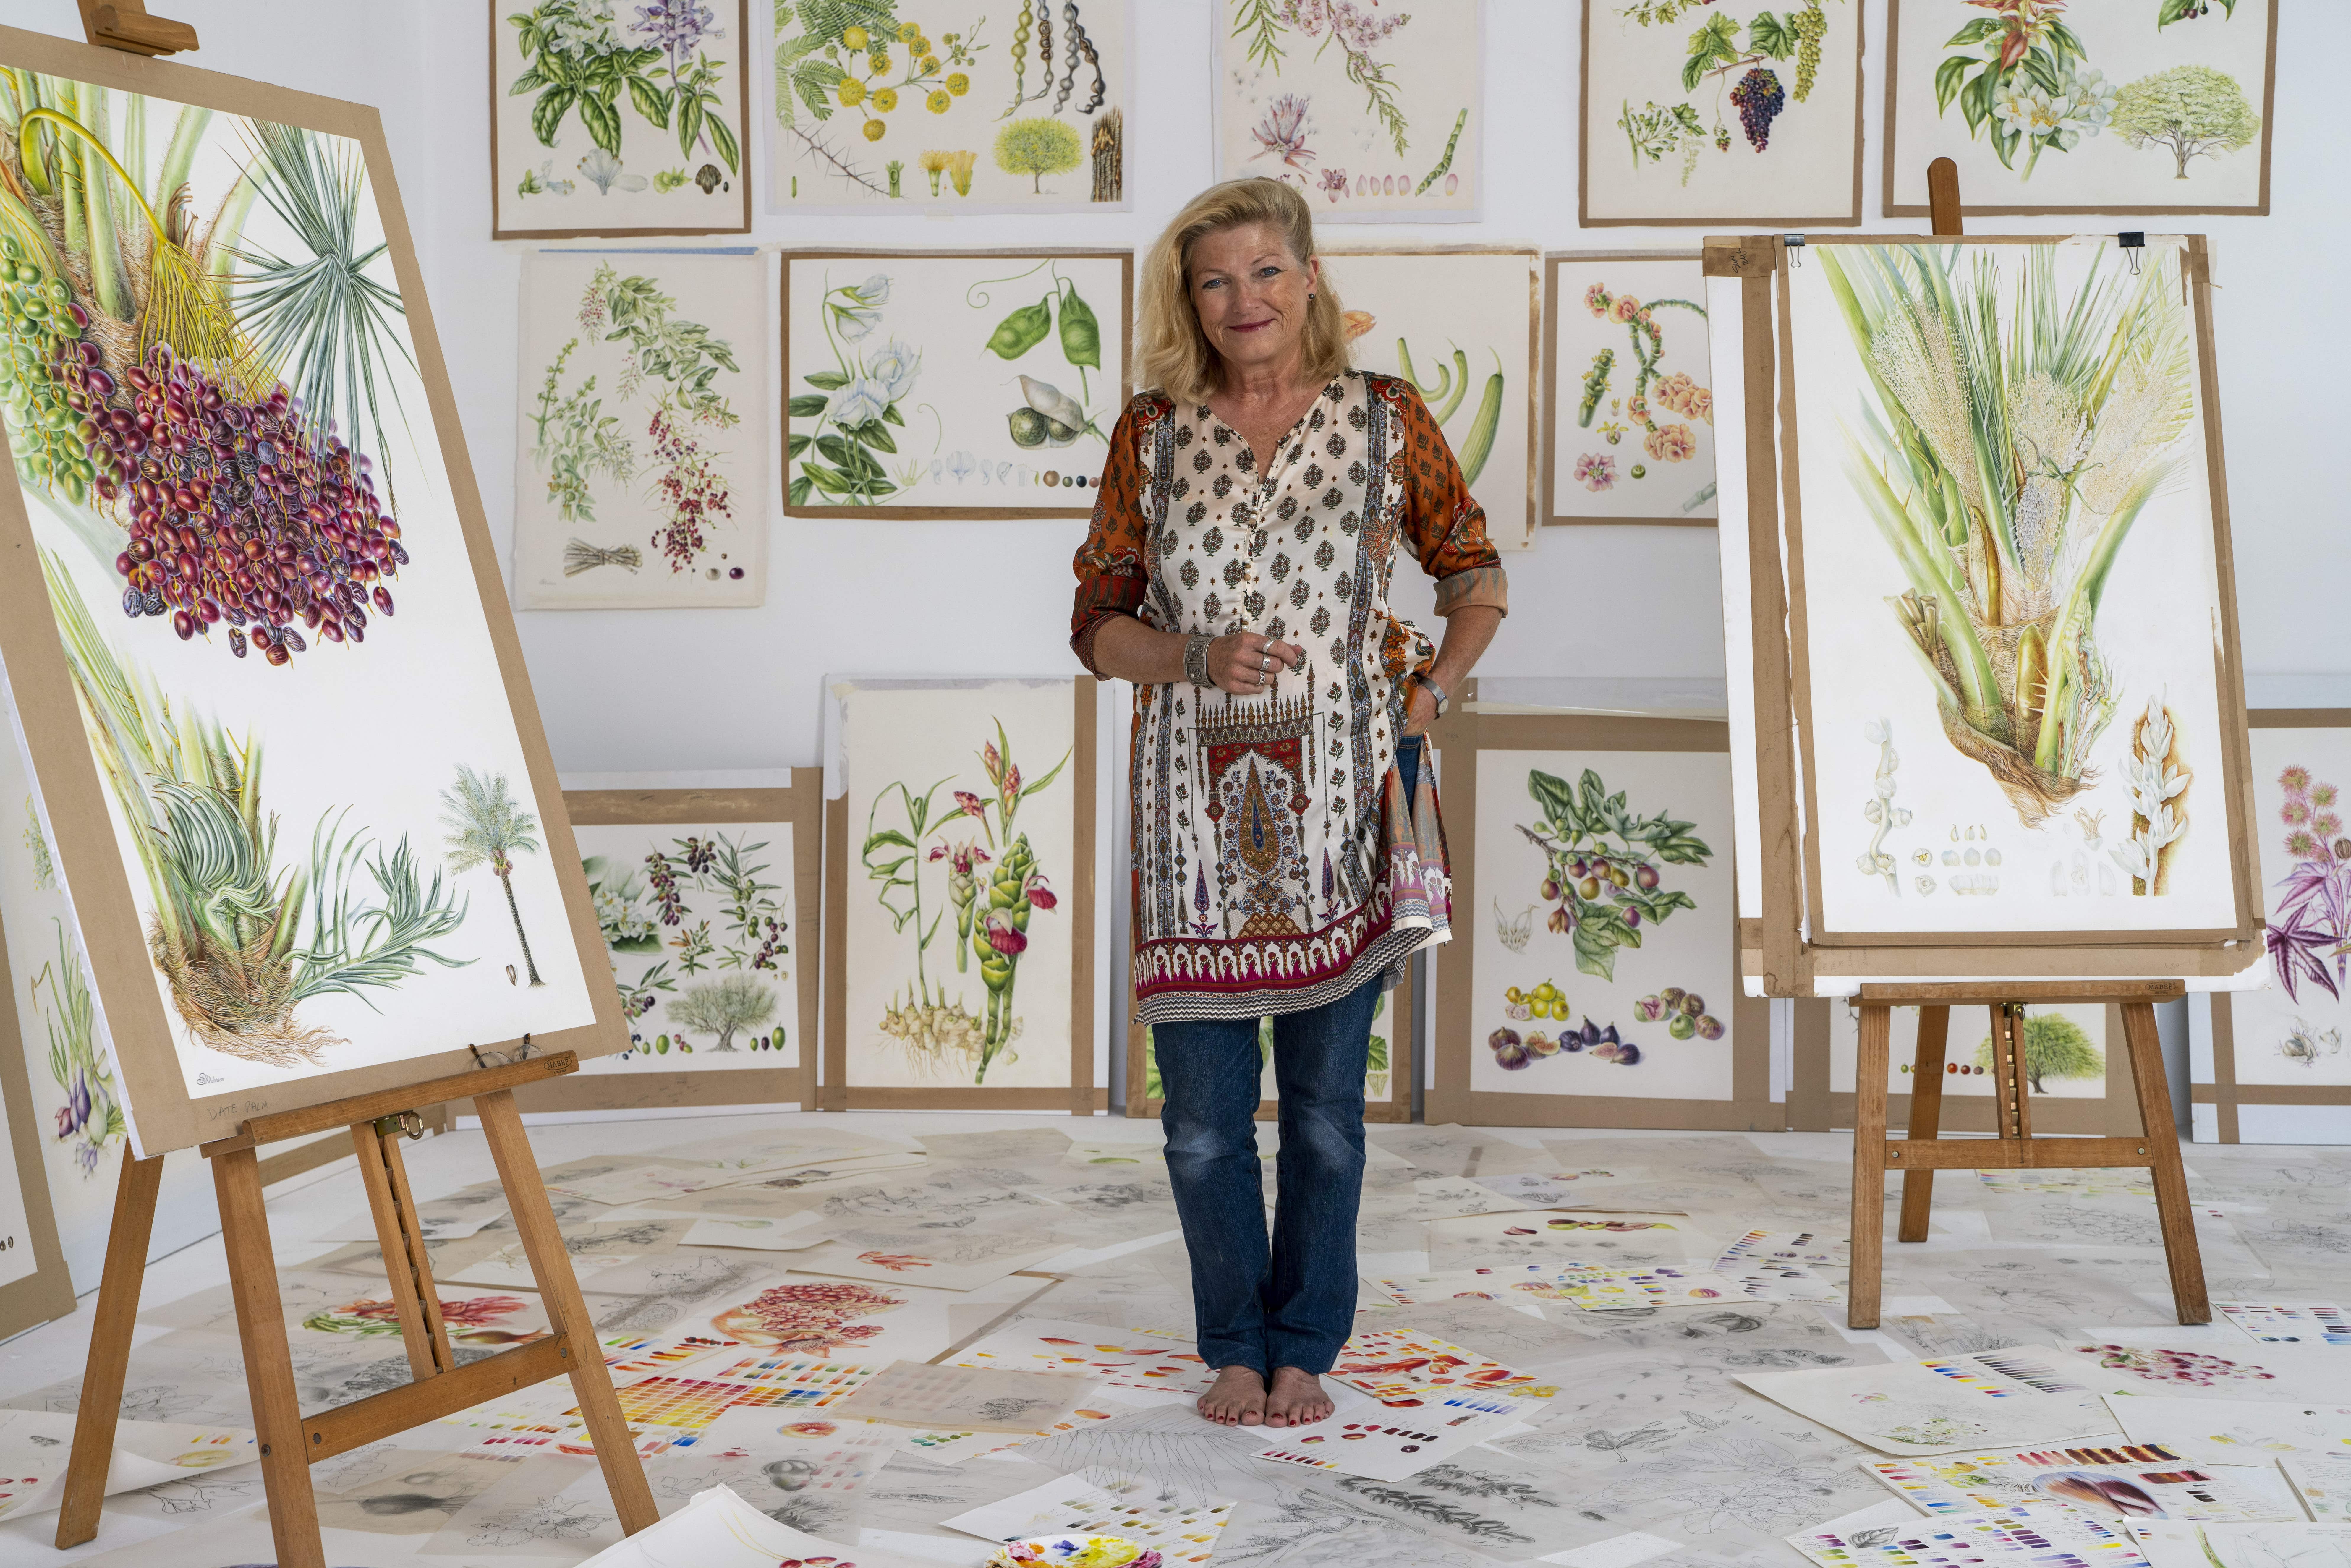 Gallery space filled with intricate botanical paintings